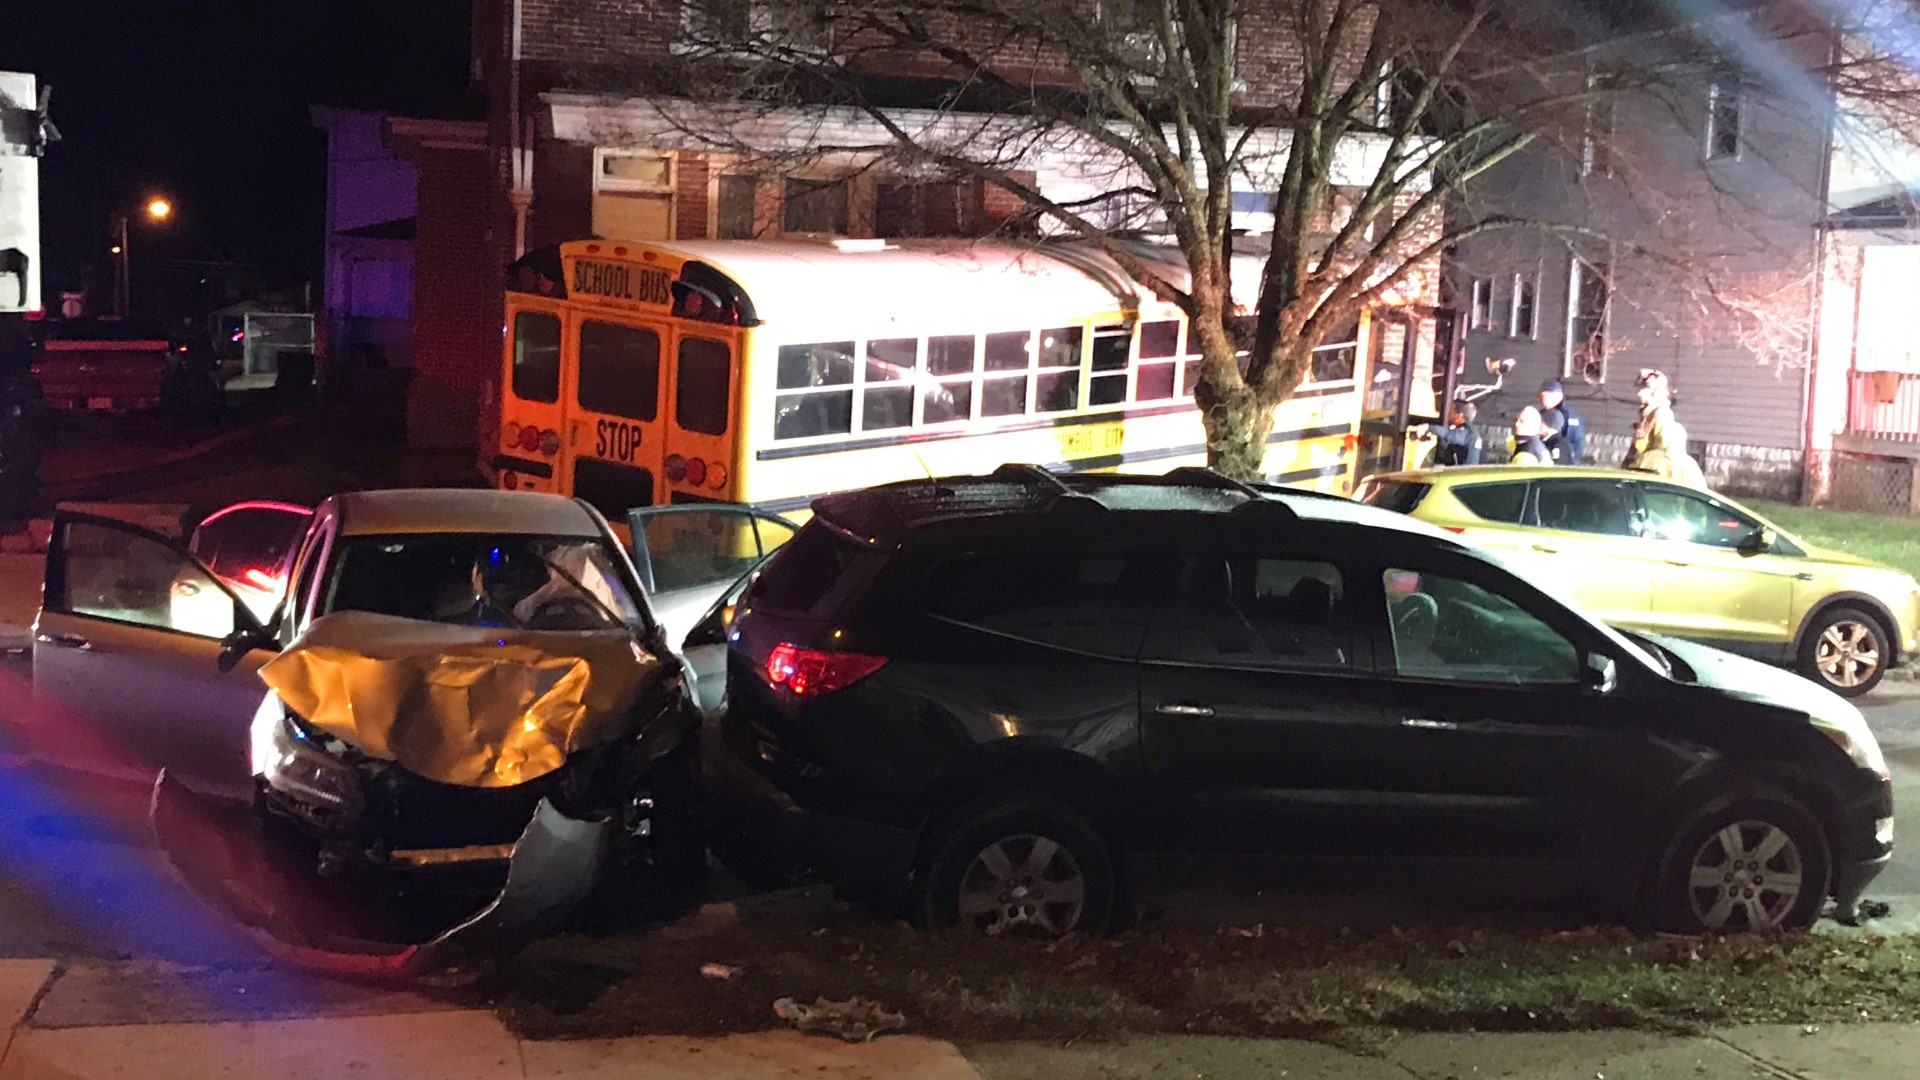 The bus crashed into a home on Palmetto Street and South Highland Avenue around 6:10 a.m. after colliding with a car.